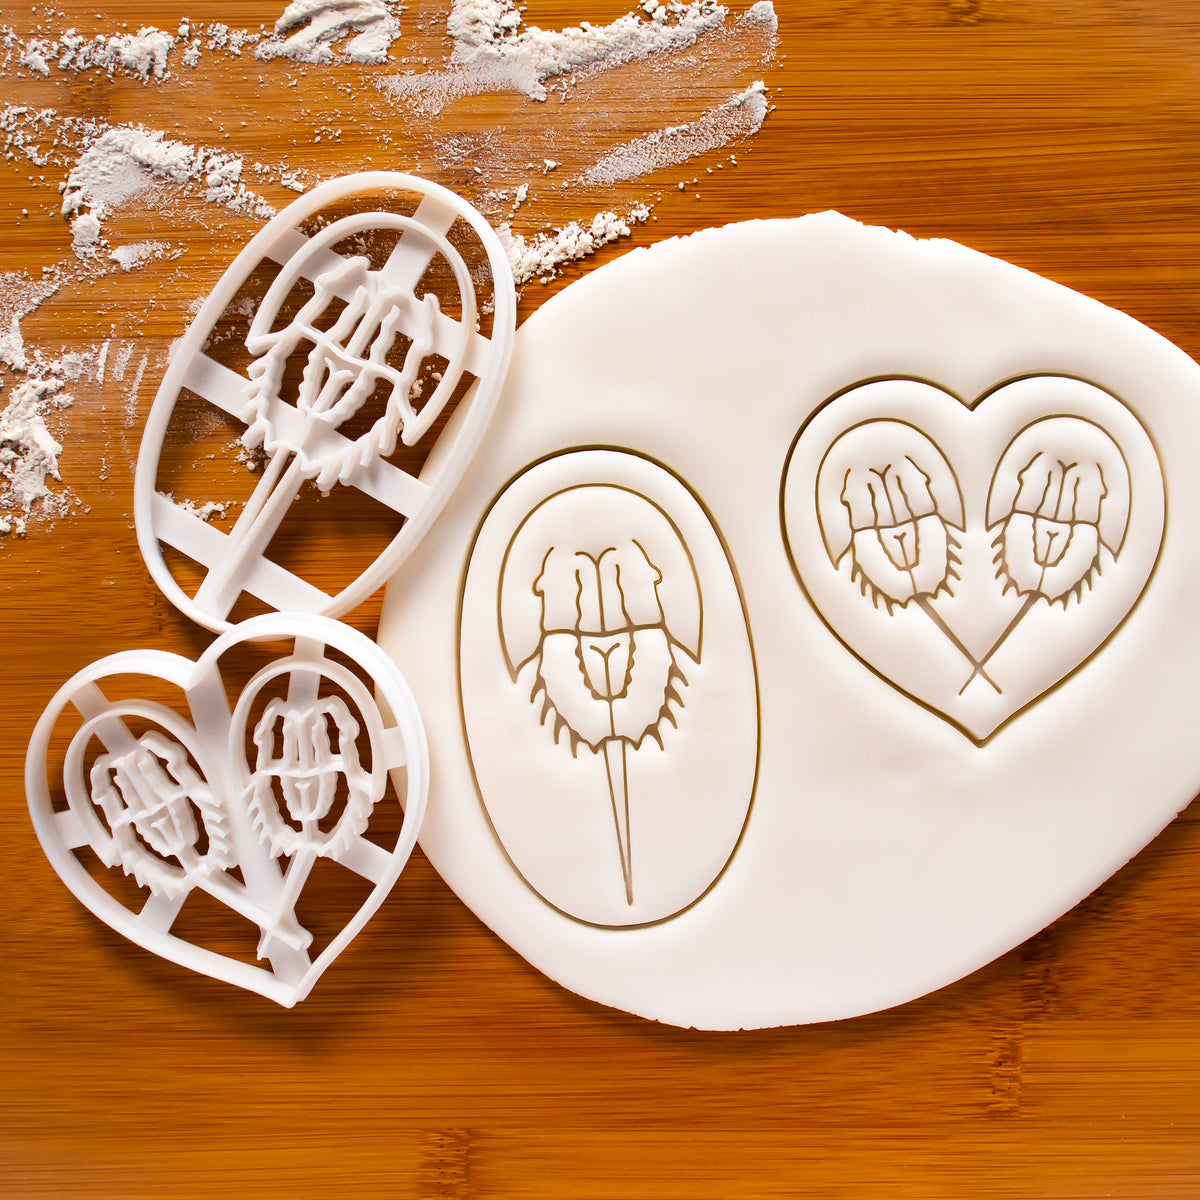 Set of 2 Horseshoe Crab Cookie Cutters: Profile and Love